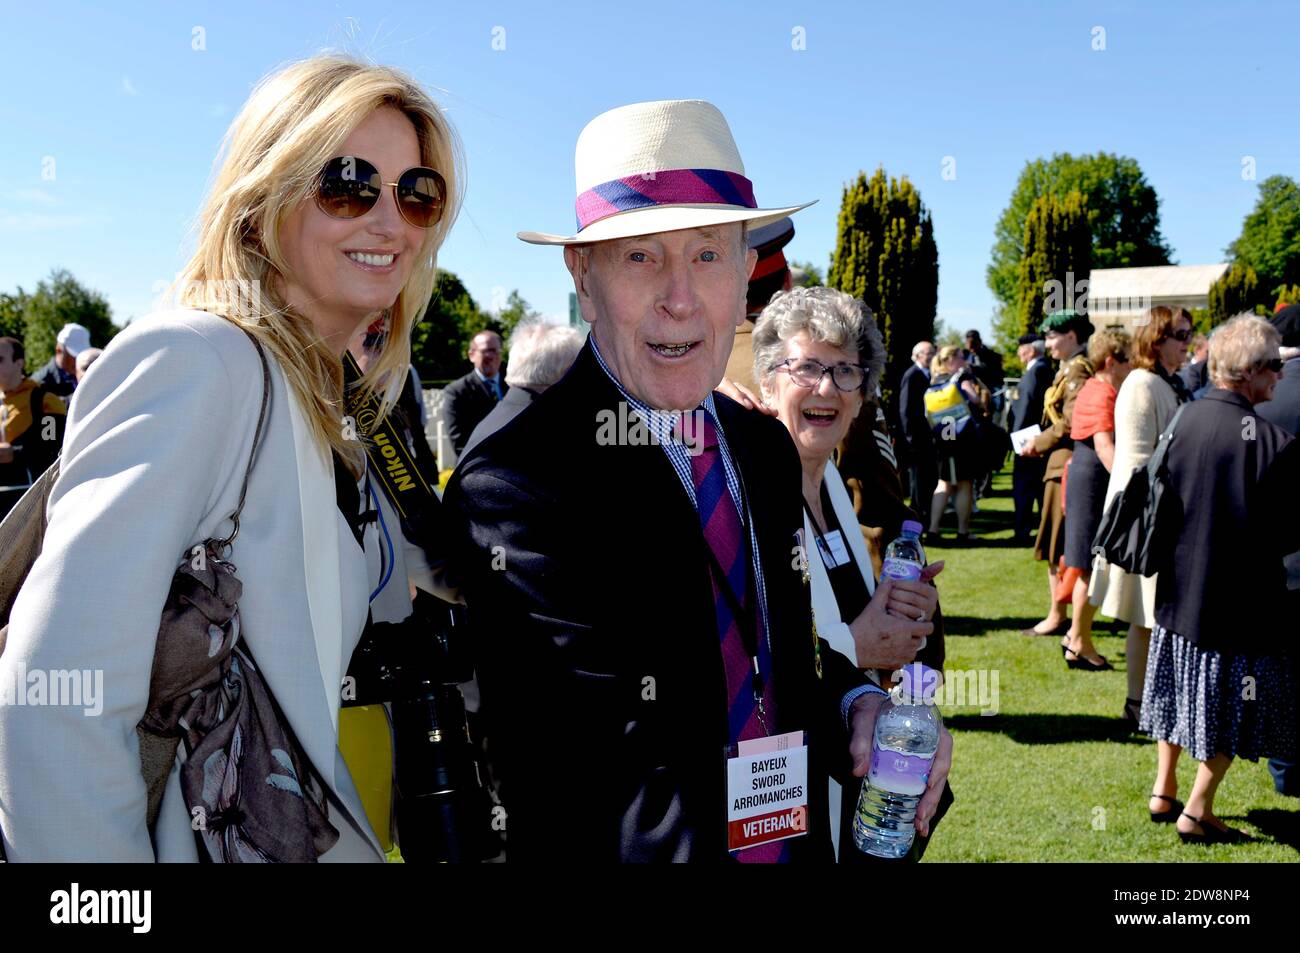 Penny Lancaster and guest attend the bi-national France-UK ceremony at the Commonwealth War Graves Cemetery in Bayeux, as part of the official ceremonies on the occasion of the D-Day 70th Anniversary, on June 6, 2014 in Normandy, France. Photo by Abd Rabbo-Bernard-Gouhier-Mousse/ABACAPRESS.COM Stock Photo